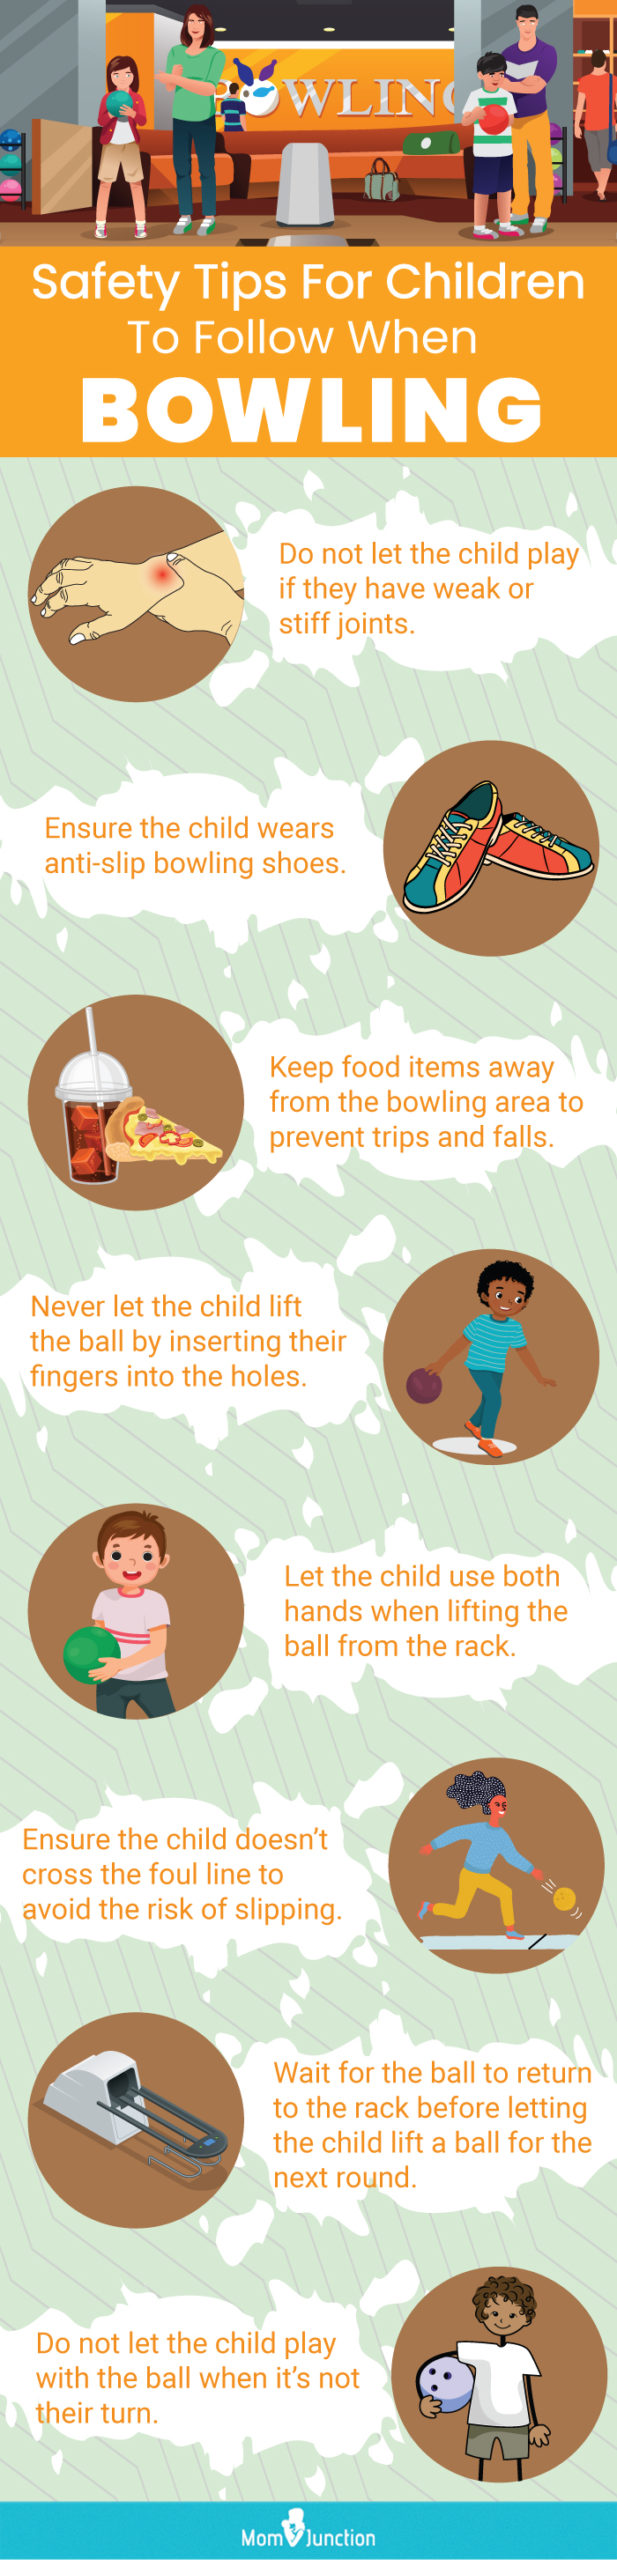 Safety Tips For Children To Follow When Bowling (infographic)